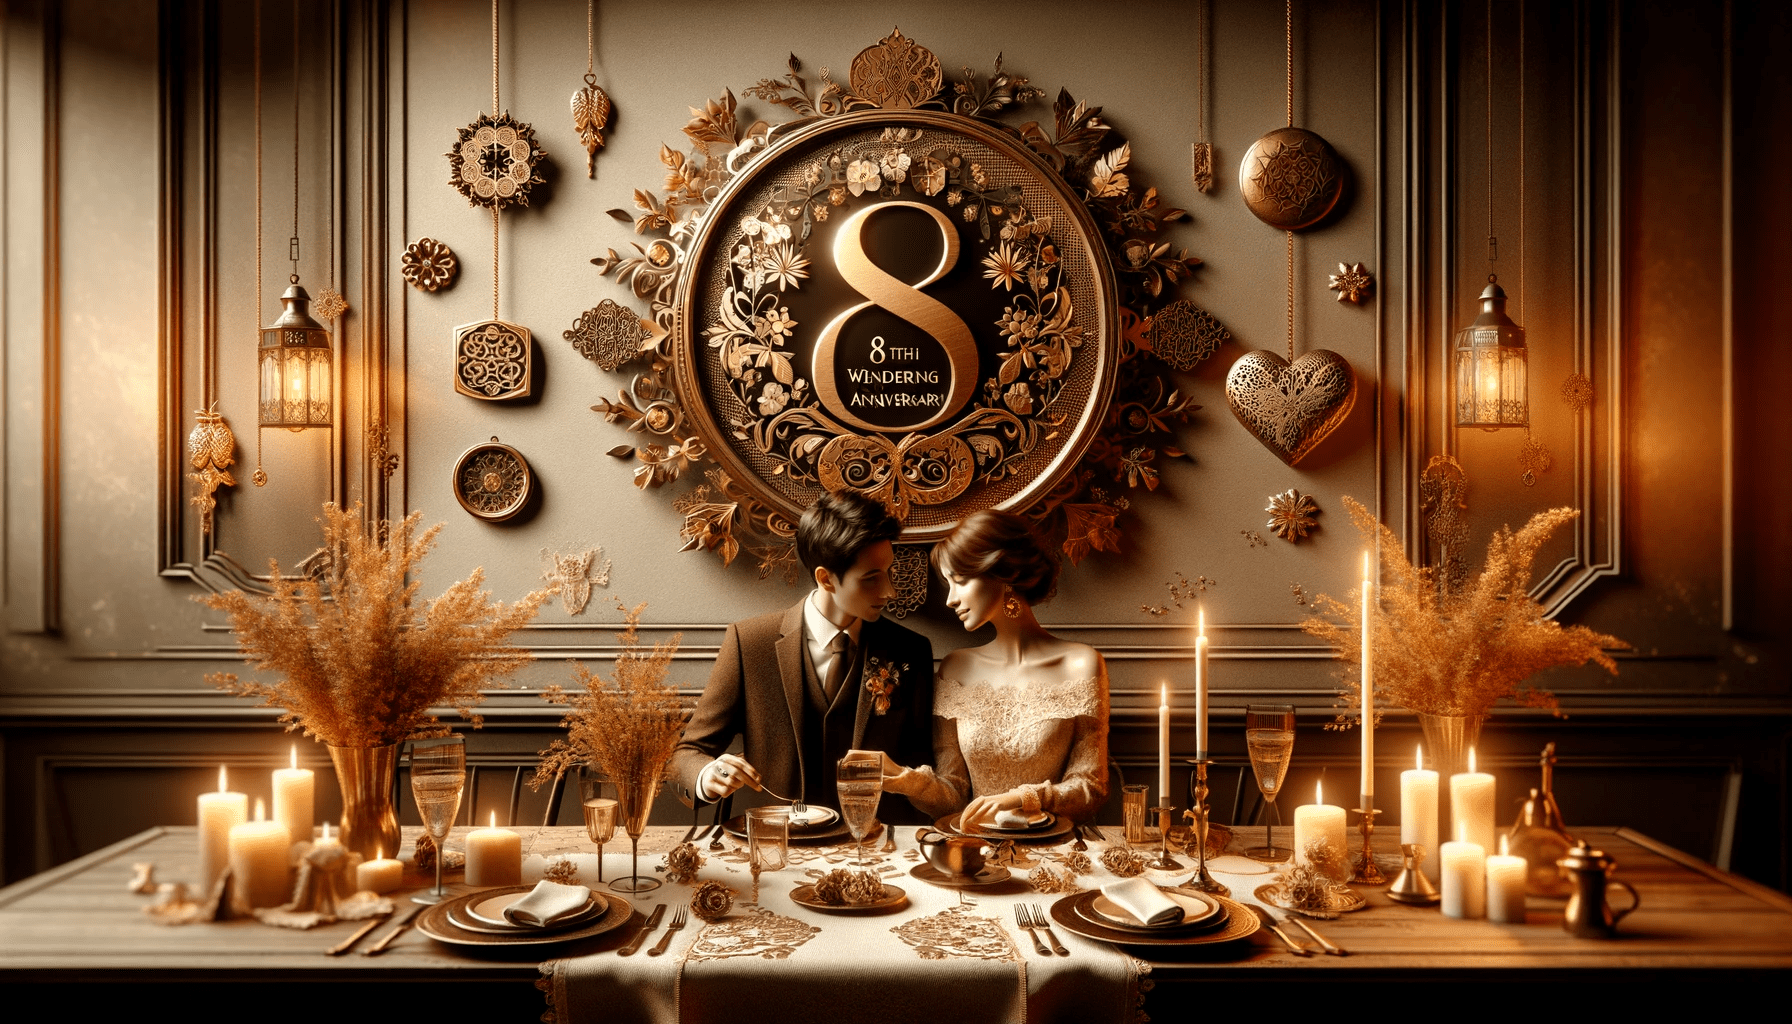 A featured image for an article on the 8th wedding anniversary, incorporating traditional and modern themes. The image should depict an elegant and robust.